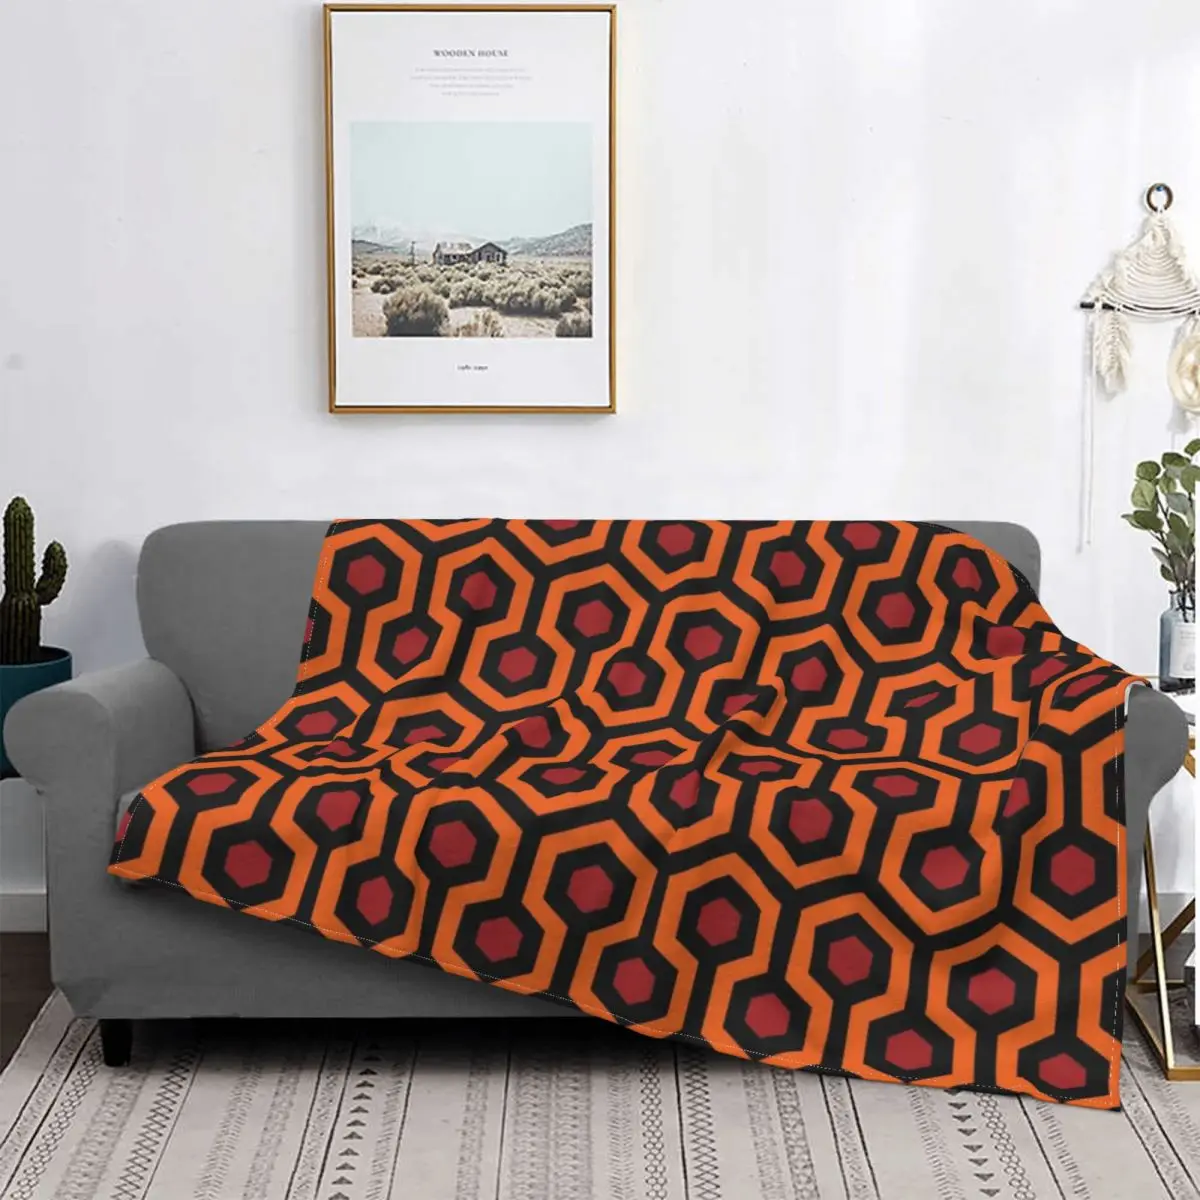 

Orange Shining Looped Hexagons Overlook Hotel Carpet Blankets Soft Flannel Vintage Geometric Throw Blanket for Couch Car Bedroom